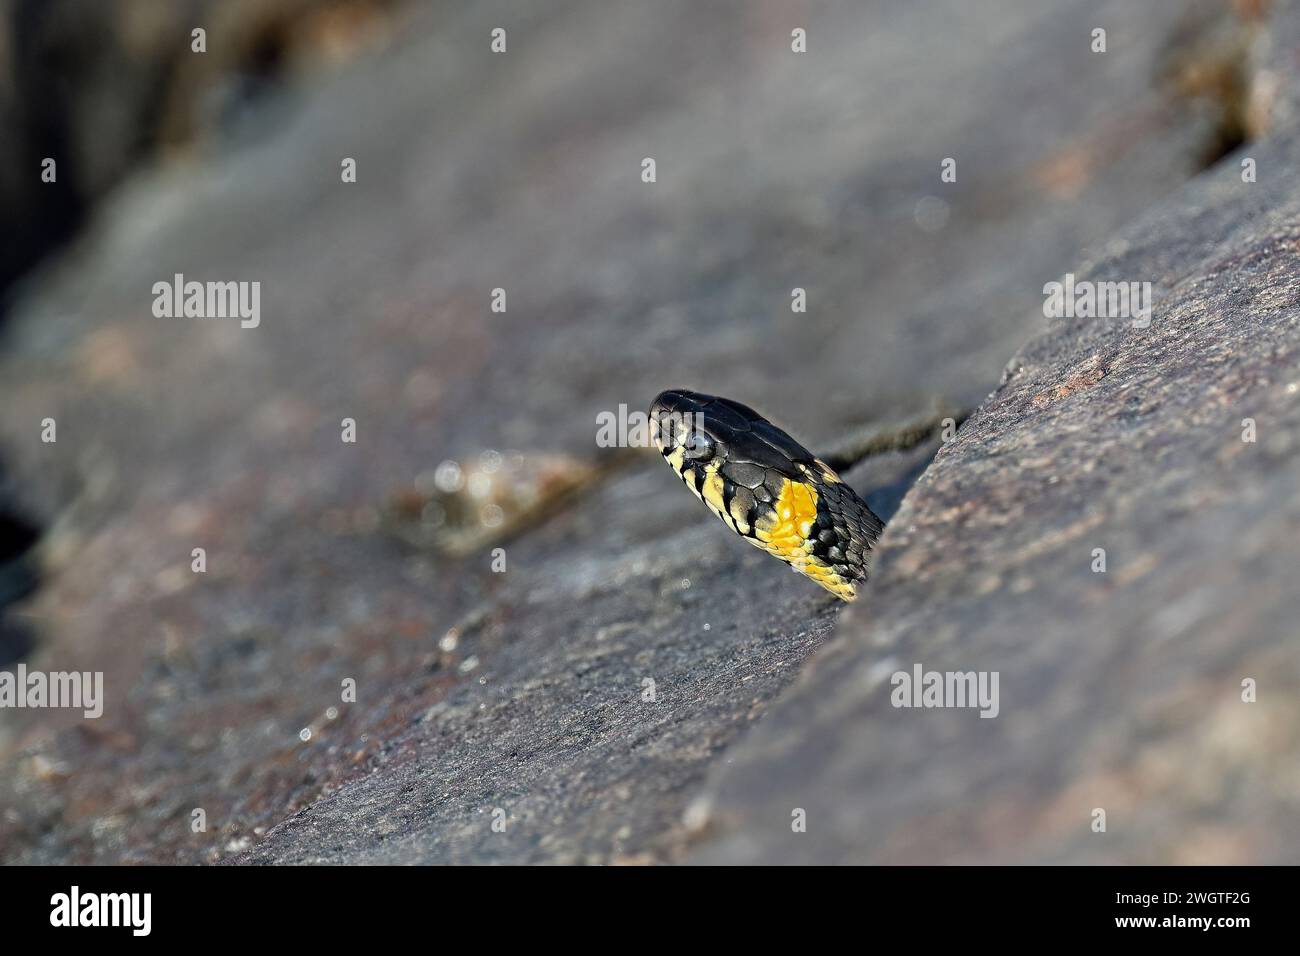 Grass snake peeking from the rock crevise Stock Photo